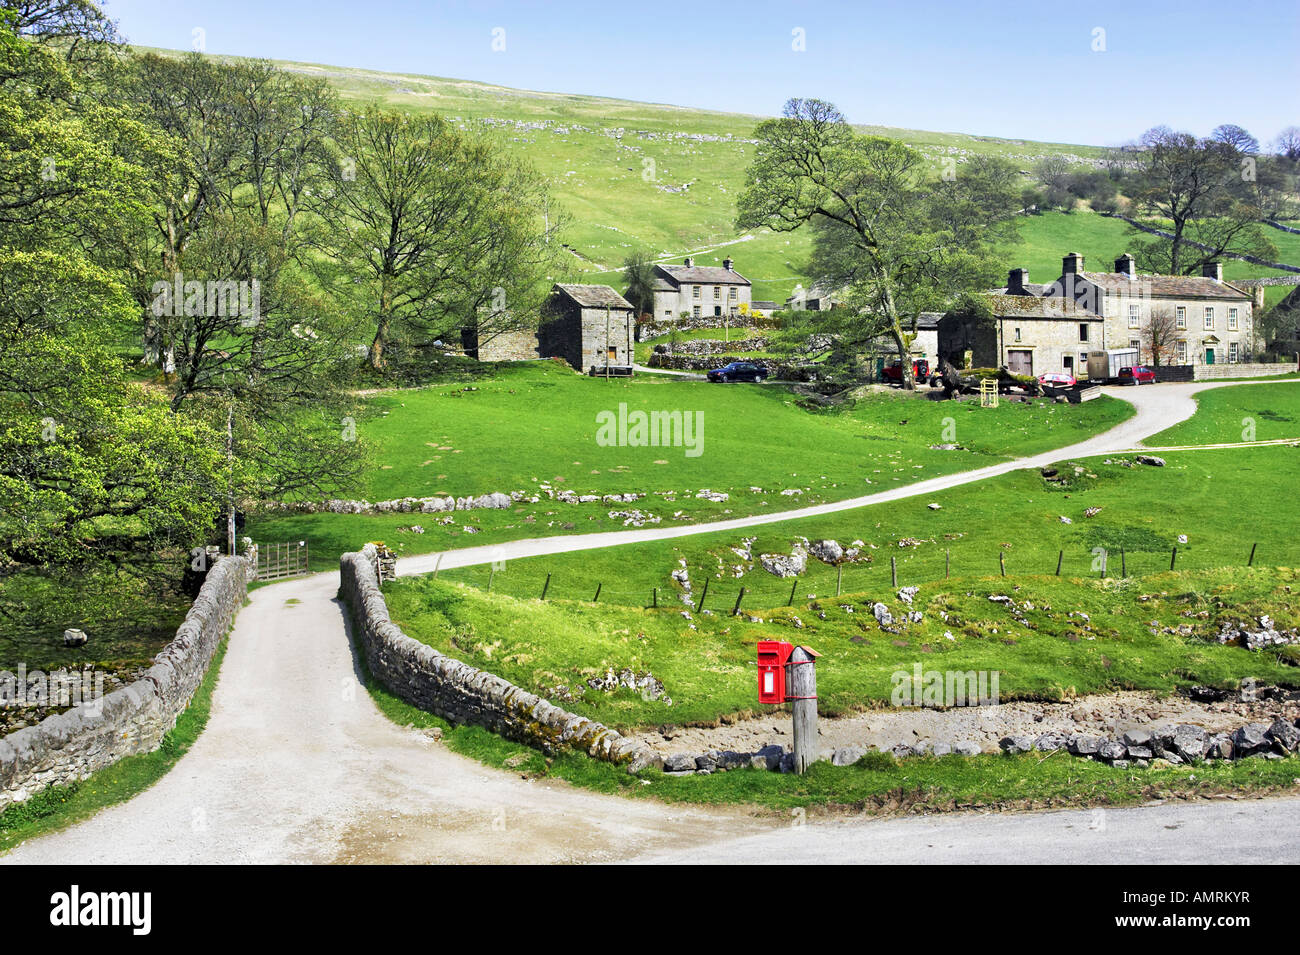 A post box next to a stone bridge and lane leading to Yockenthwaite village in the Yorkshire Dales National Park, UK Stock Photo